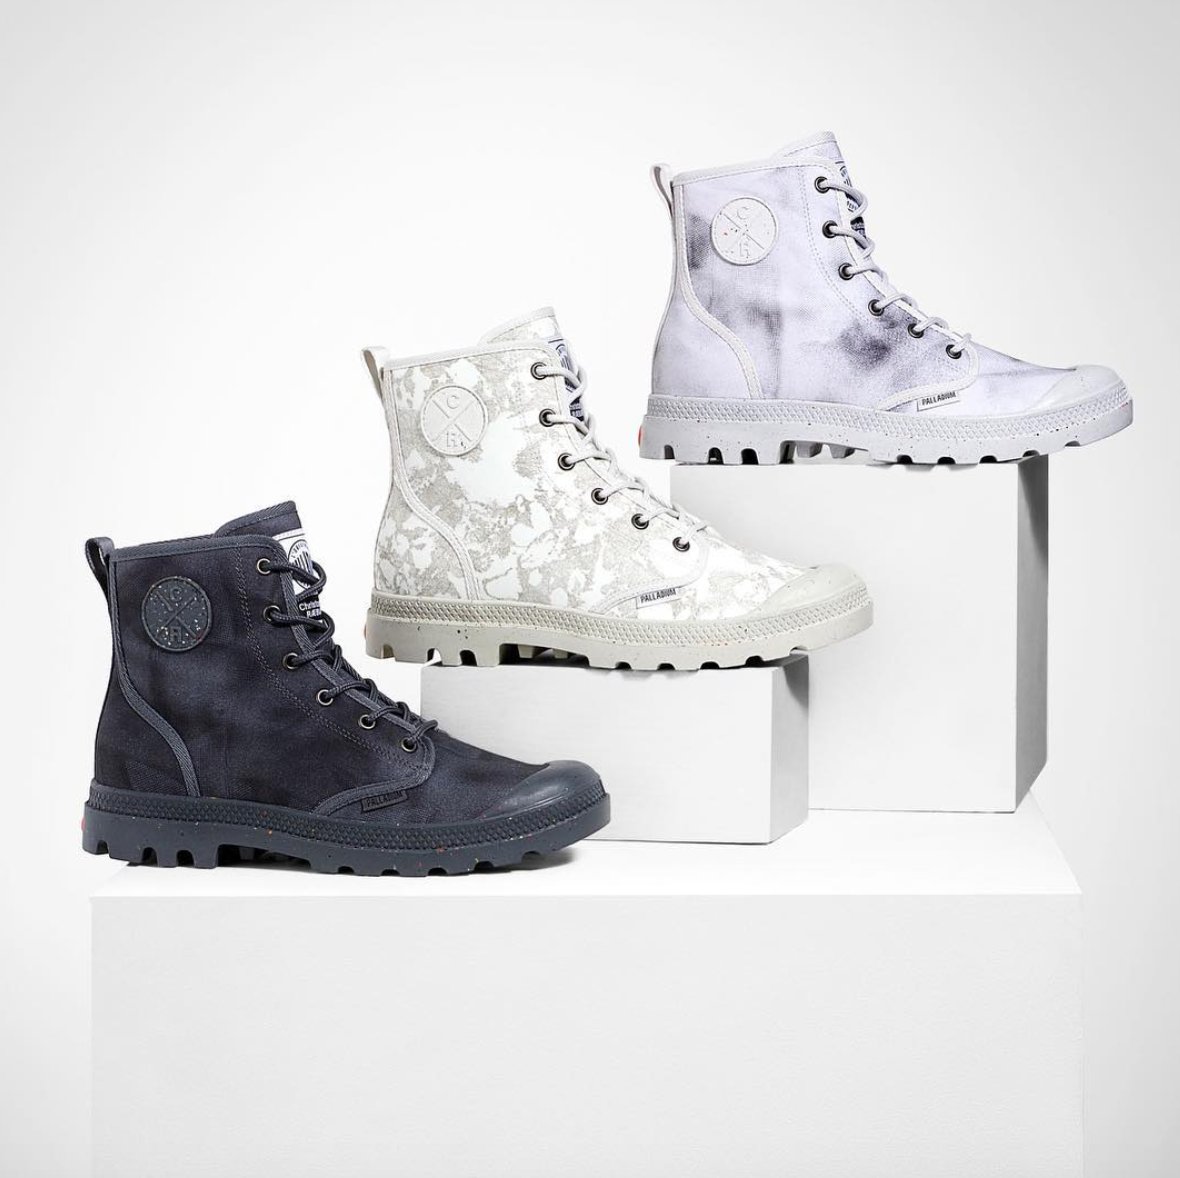 Master of reusing and recycling @StudioRaeburn has teamed up with @palladiumboots7 to create these! What do you think? #fashion #boots #christopherraeburn #organic #recycled